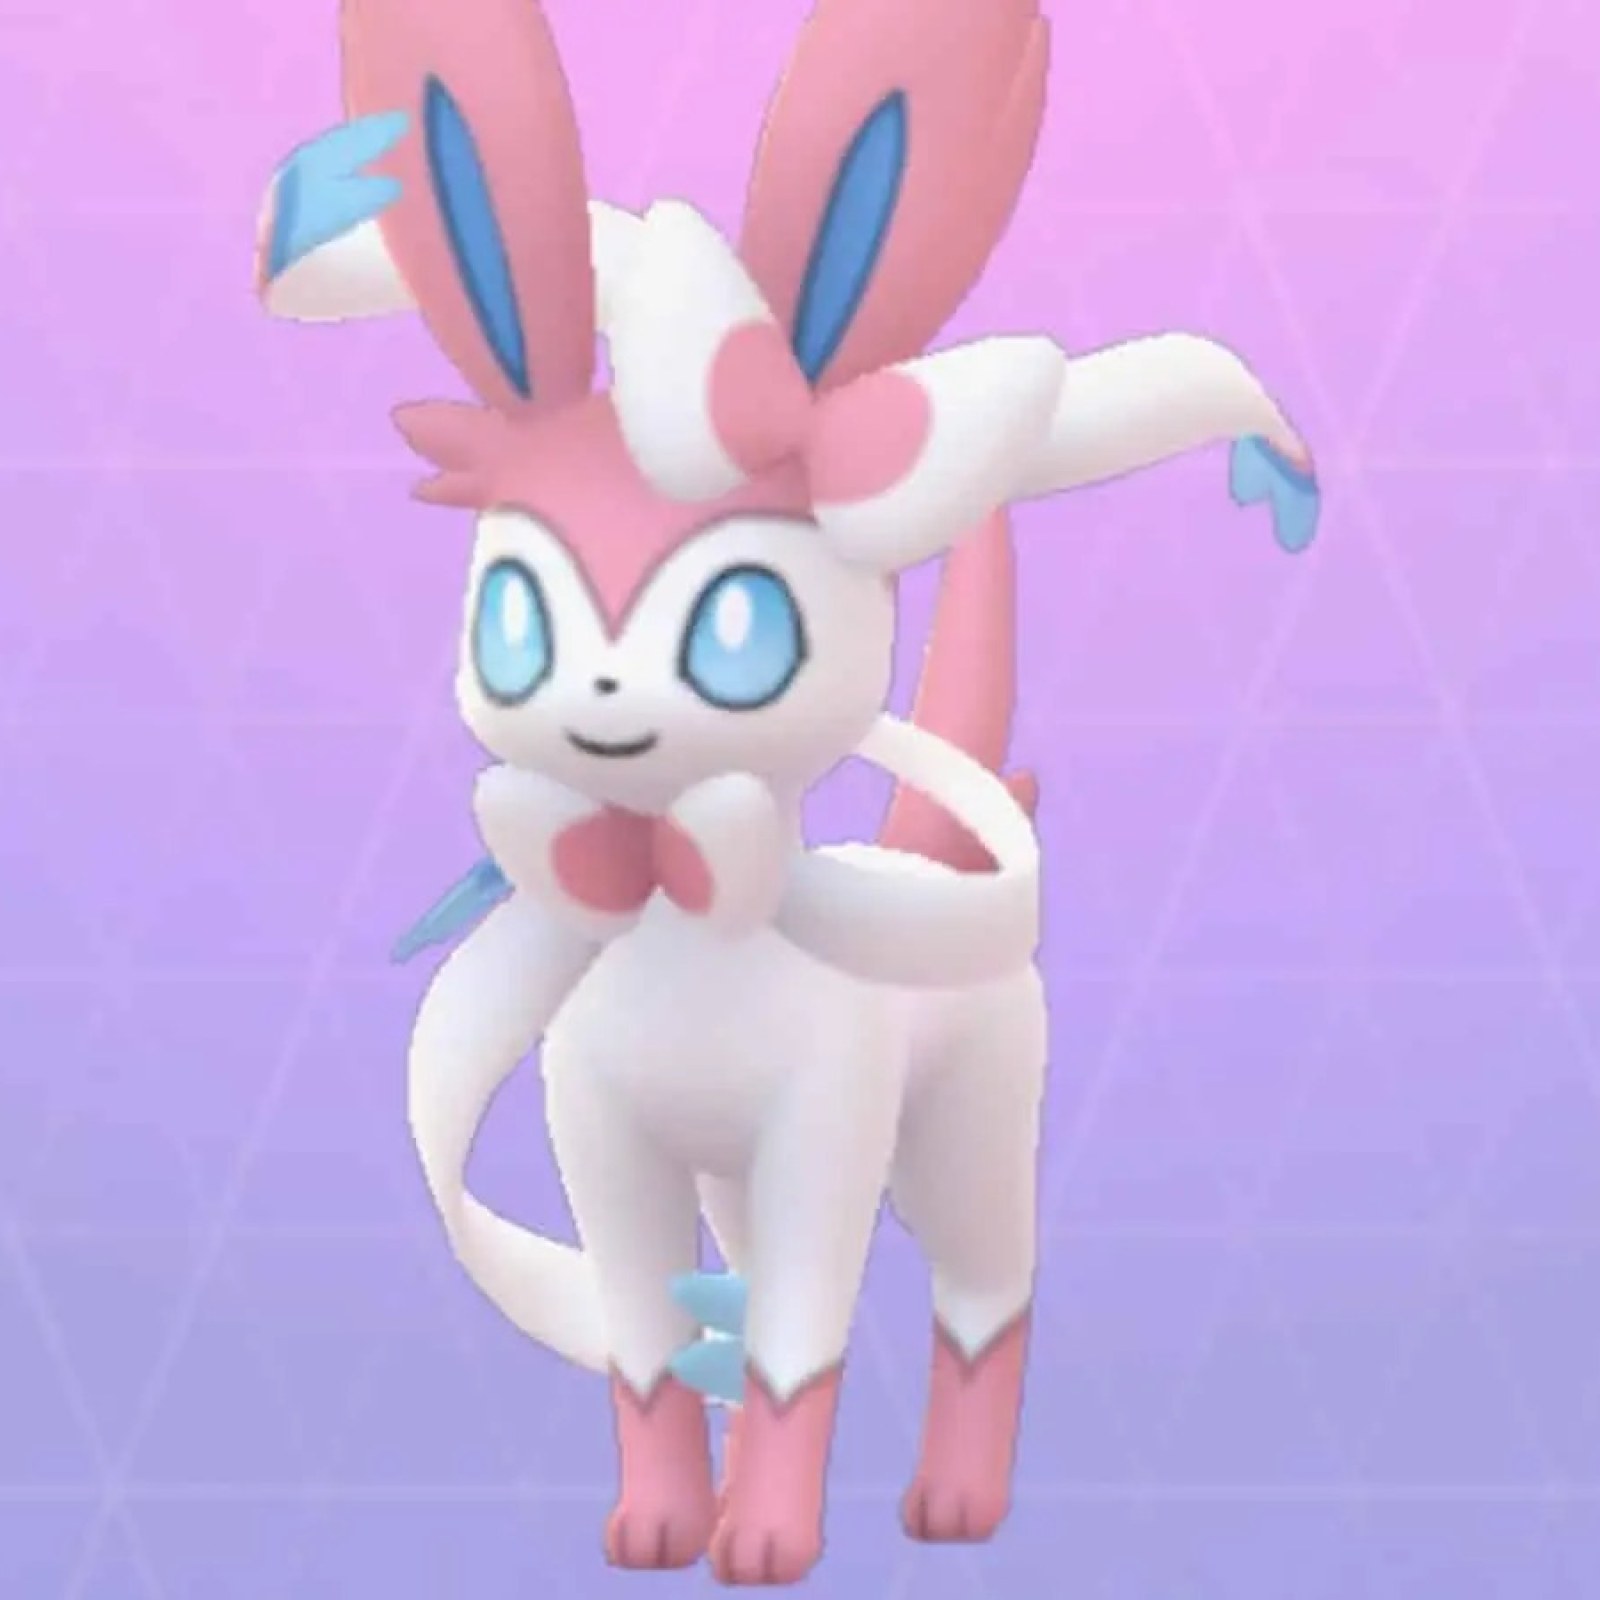 2023 Shiny Eevee Evolutions Ranking And Catching [Can't Miss]